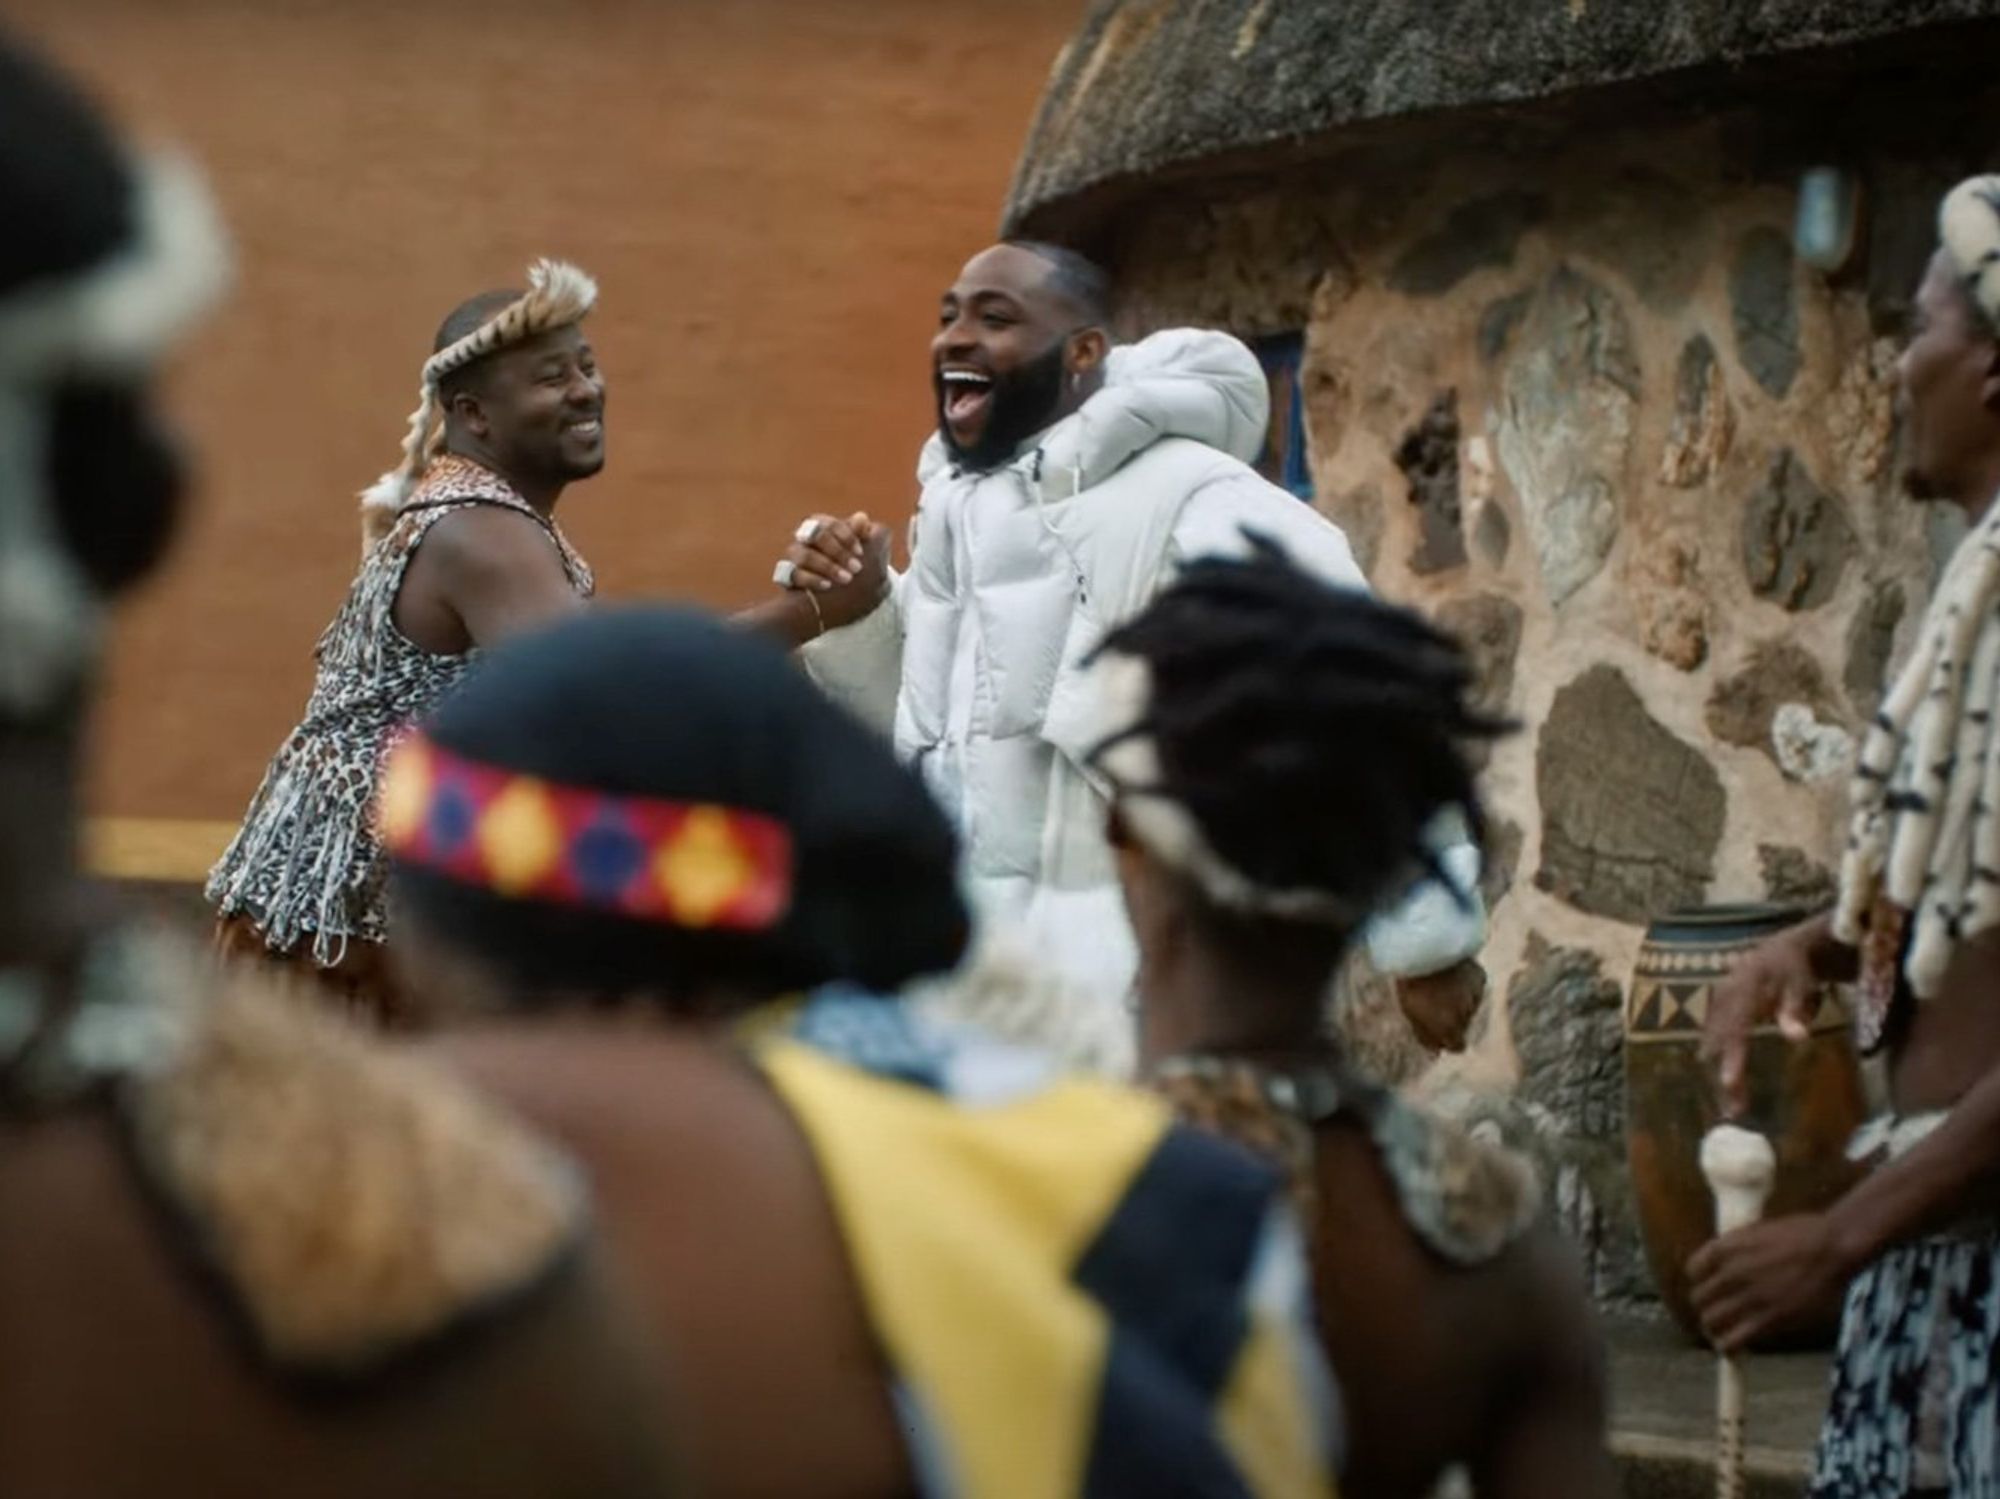 Close up image of Davido in music video.